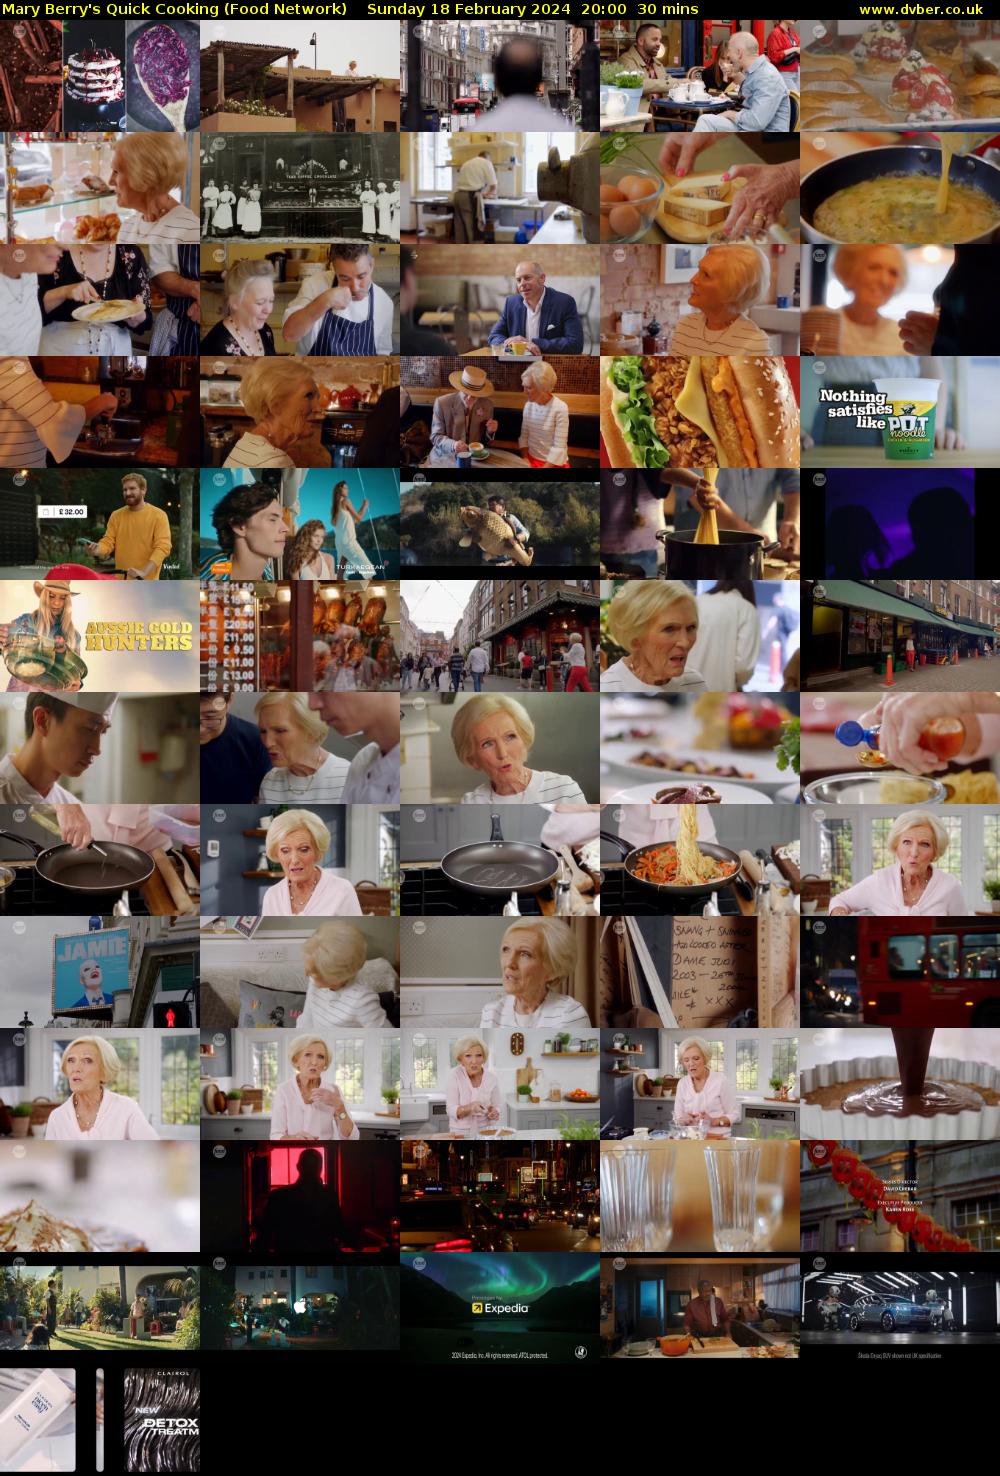 Mary Berry's Quick Cooking (Food Network) Sunday 18 February 2024 20:00 - 20:30